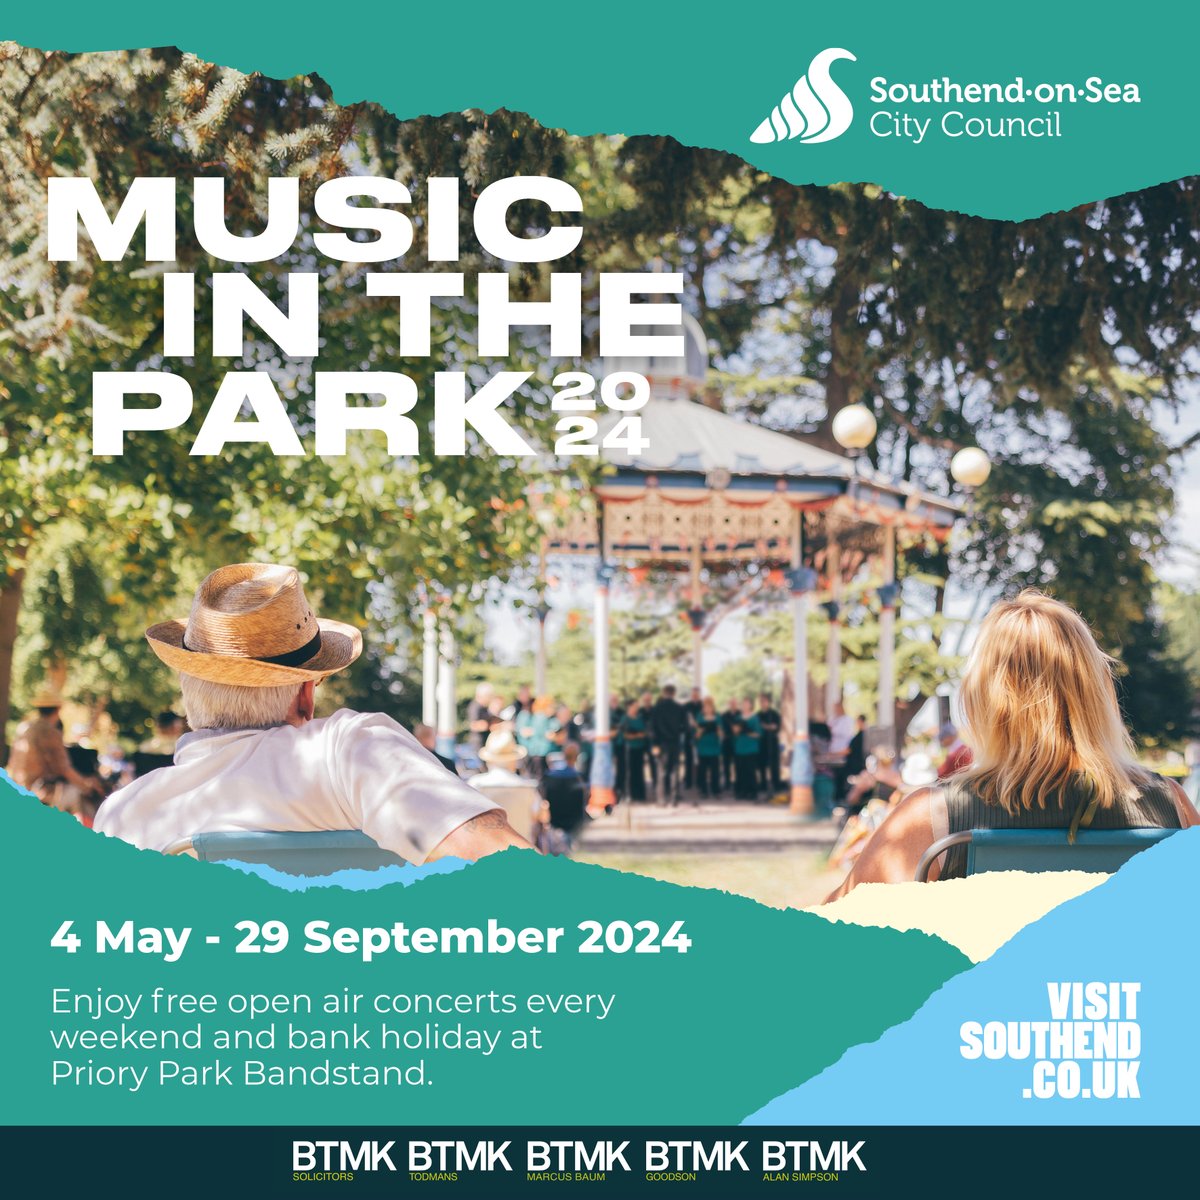 RETURNING THIS WEEKEND 🎉 Head down to @SouthendParks Priory Park Bandstand THIS WEEKEND for the FIRST @SouthendCityC's FREE to attend 'Music in the Park' of the season! 🌳🎶 Discover the bands playing here! 👇 visitsouthend.co.uk/music-in-the-p… @BTMKSolicitors kindly sponsor this event.